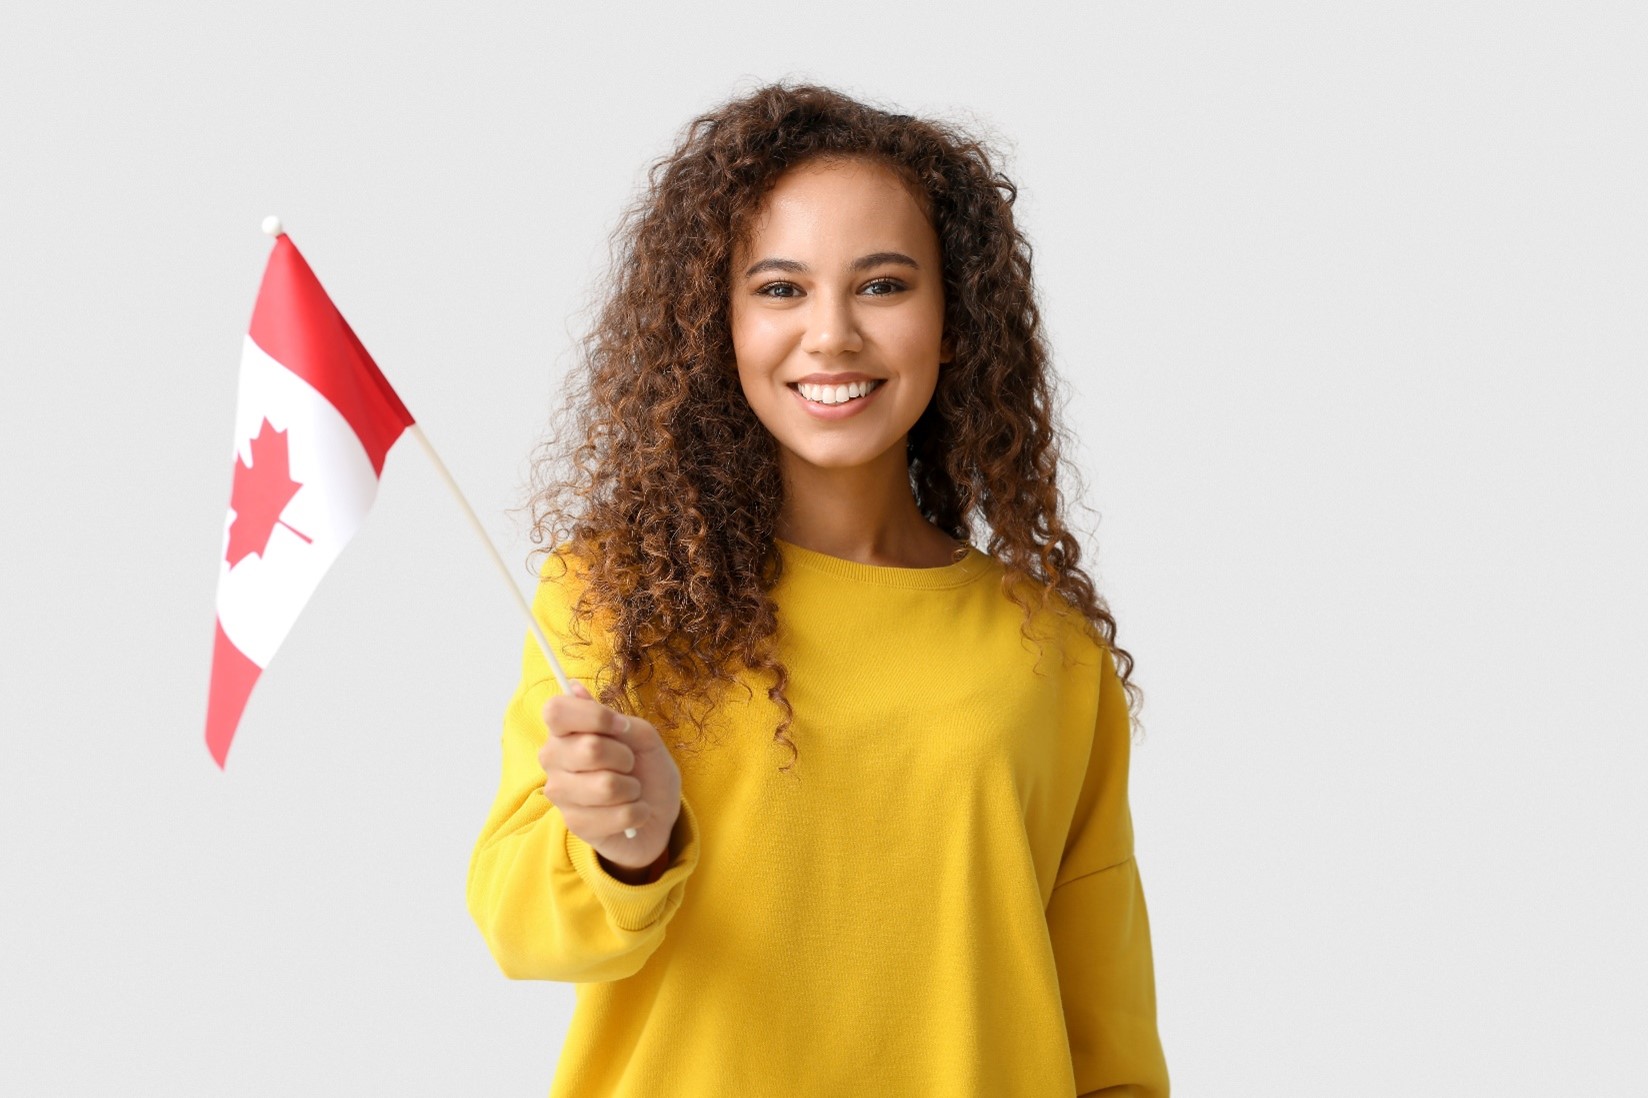 Young woman wearing a yellow sweatshirt and smiling while holding a Candian flag. 